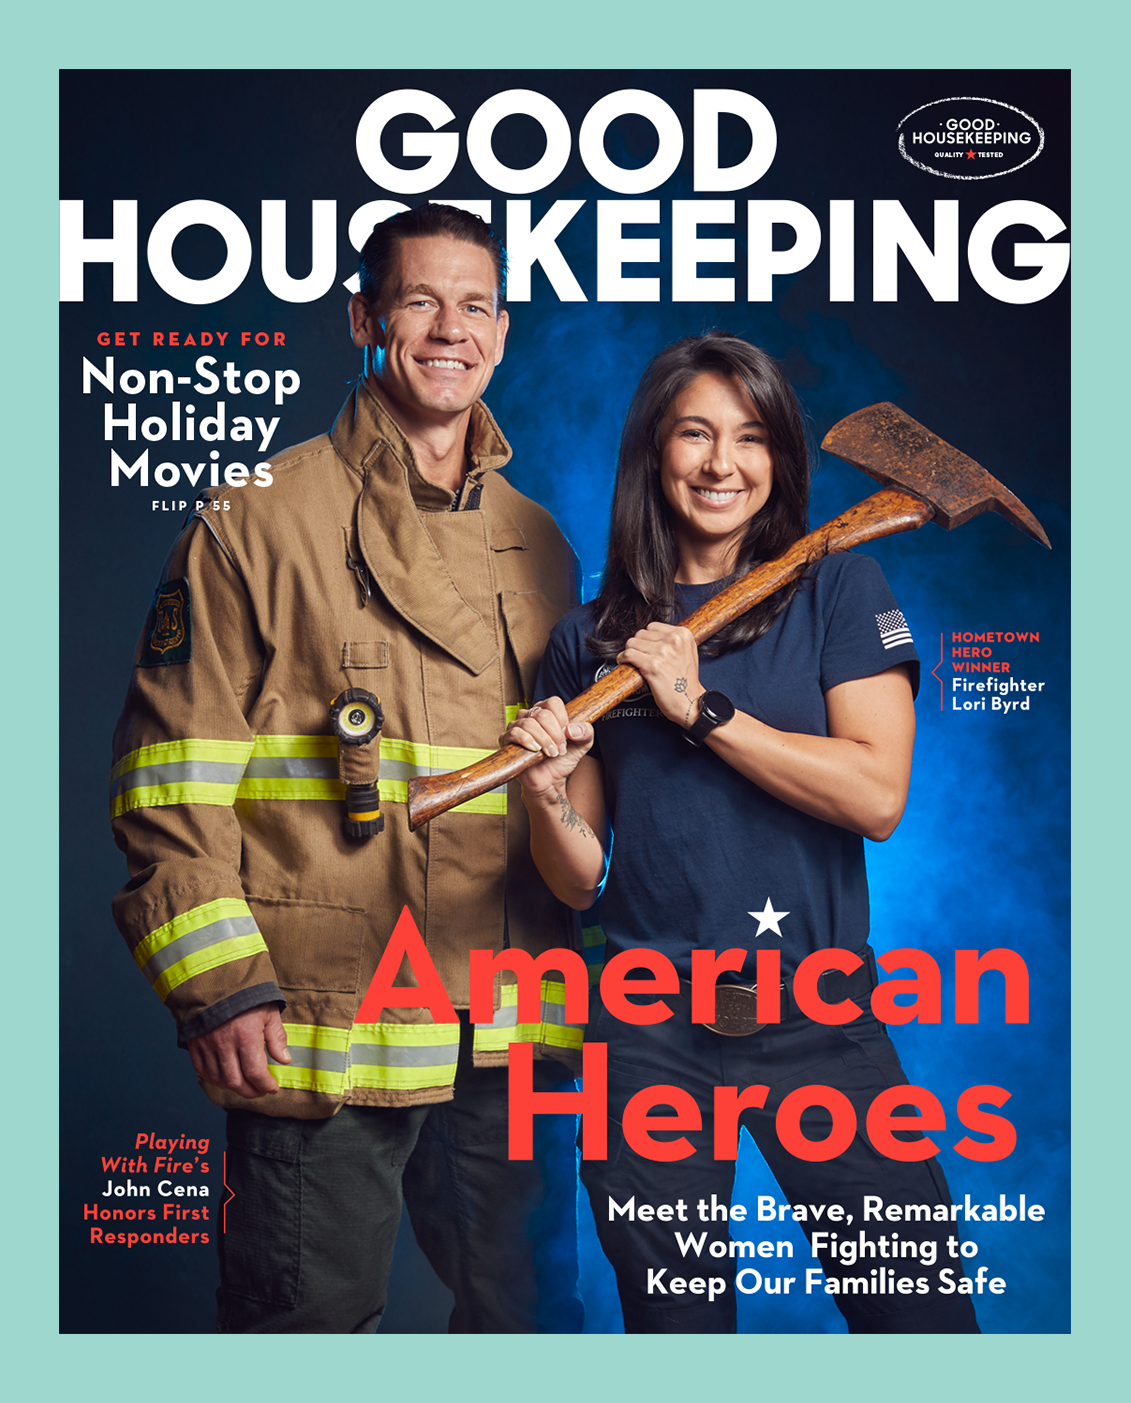 Contact the Editors and Get Help With Your Good Housekeeping Subscription